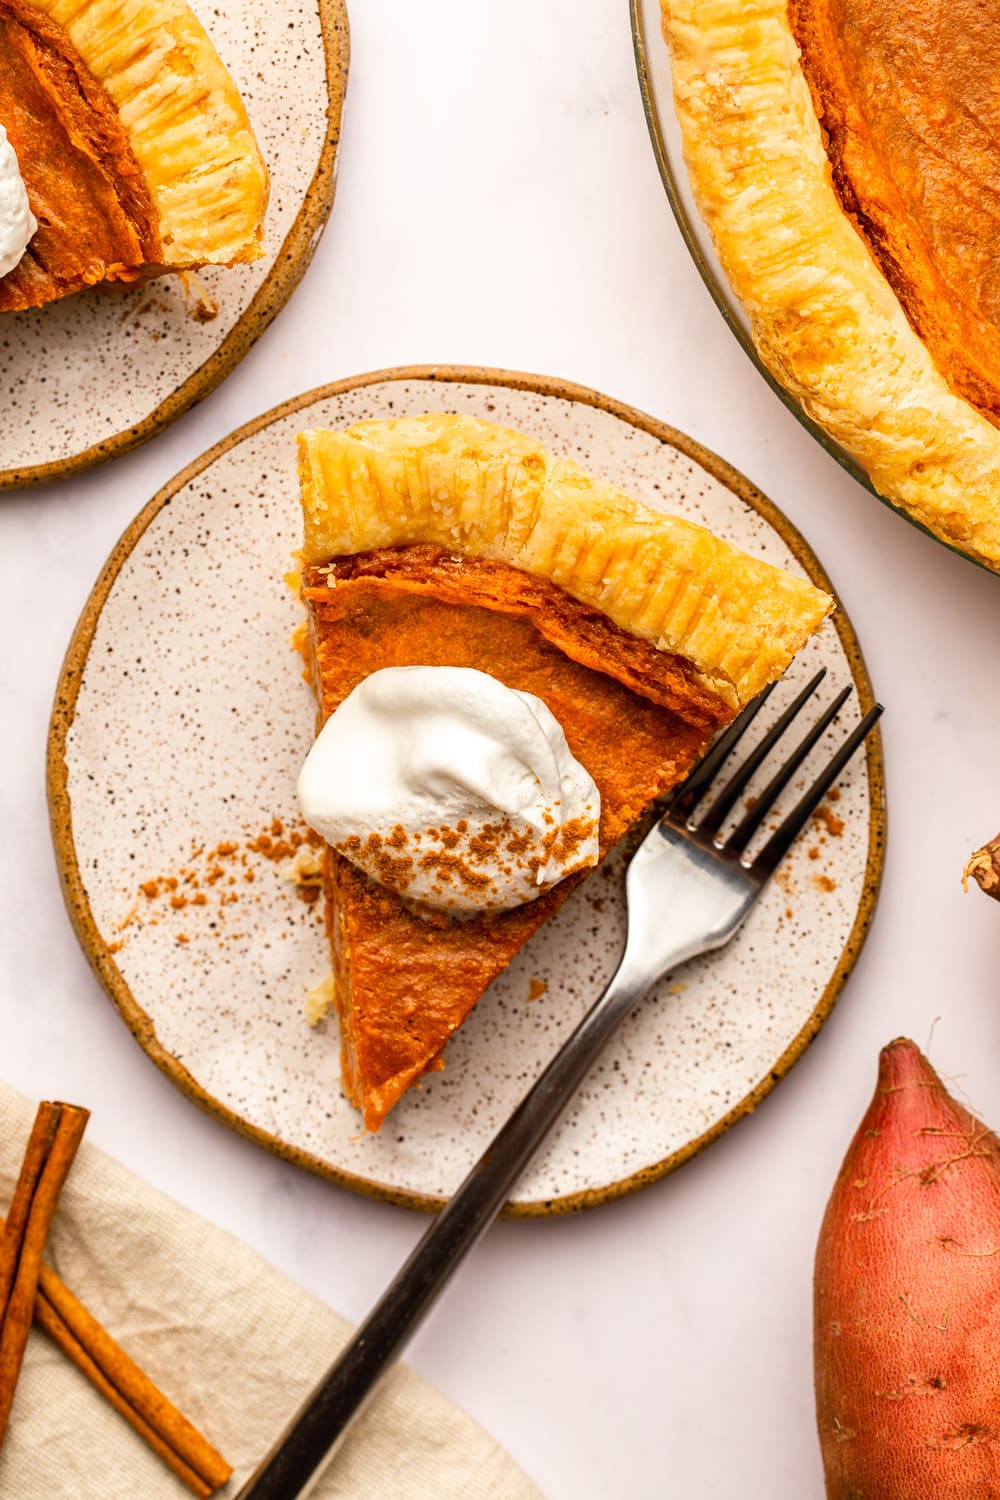 a slice of vegan sweet potato pie served on a white plate topped with coconut cream